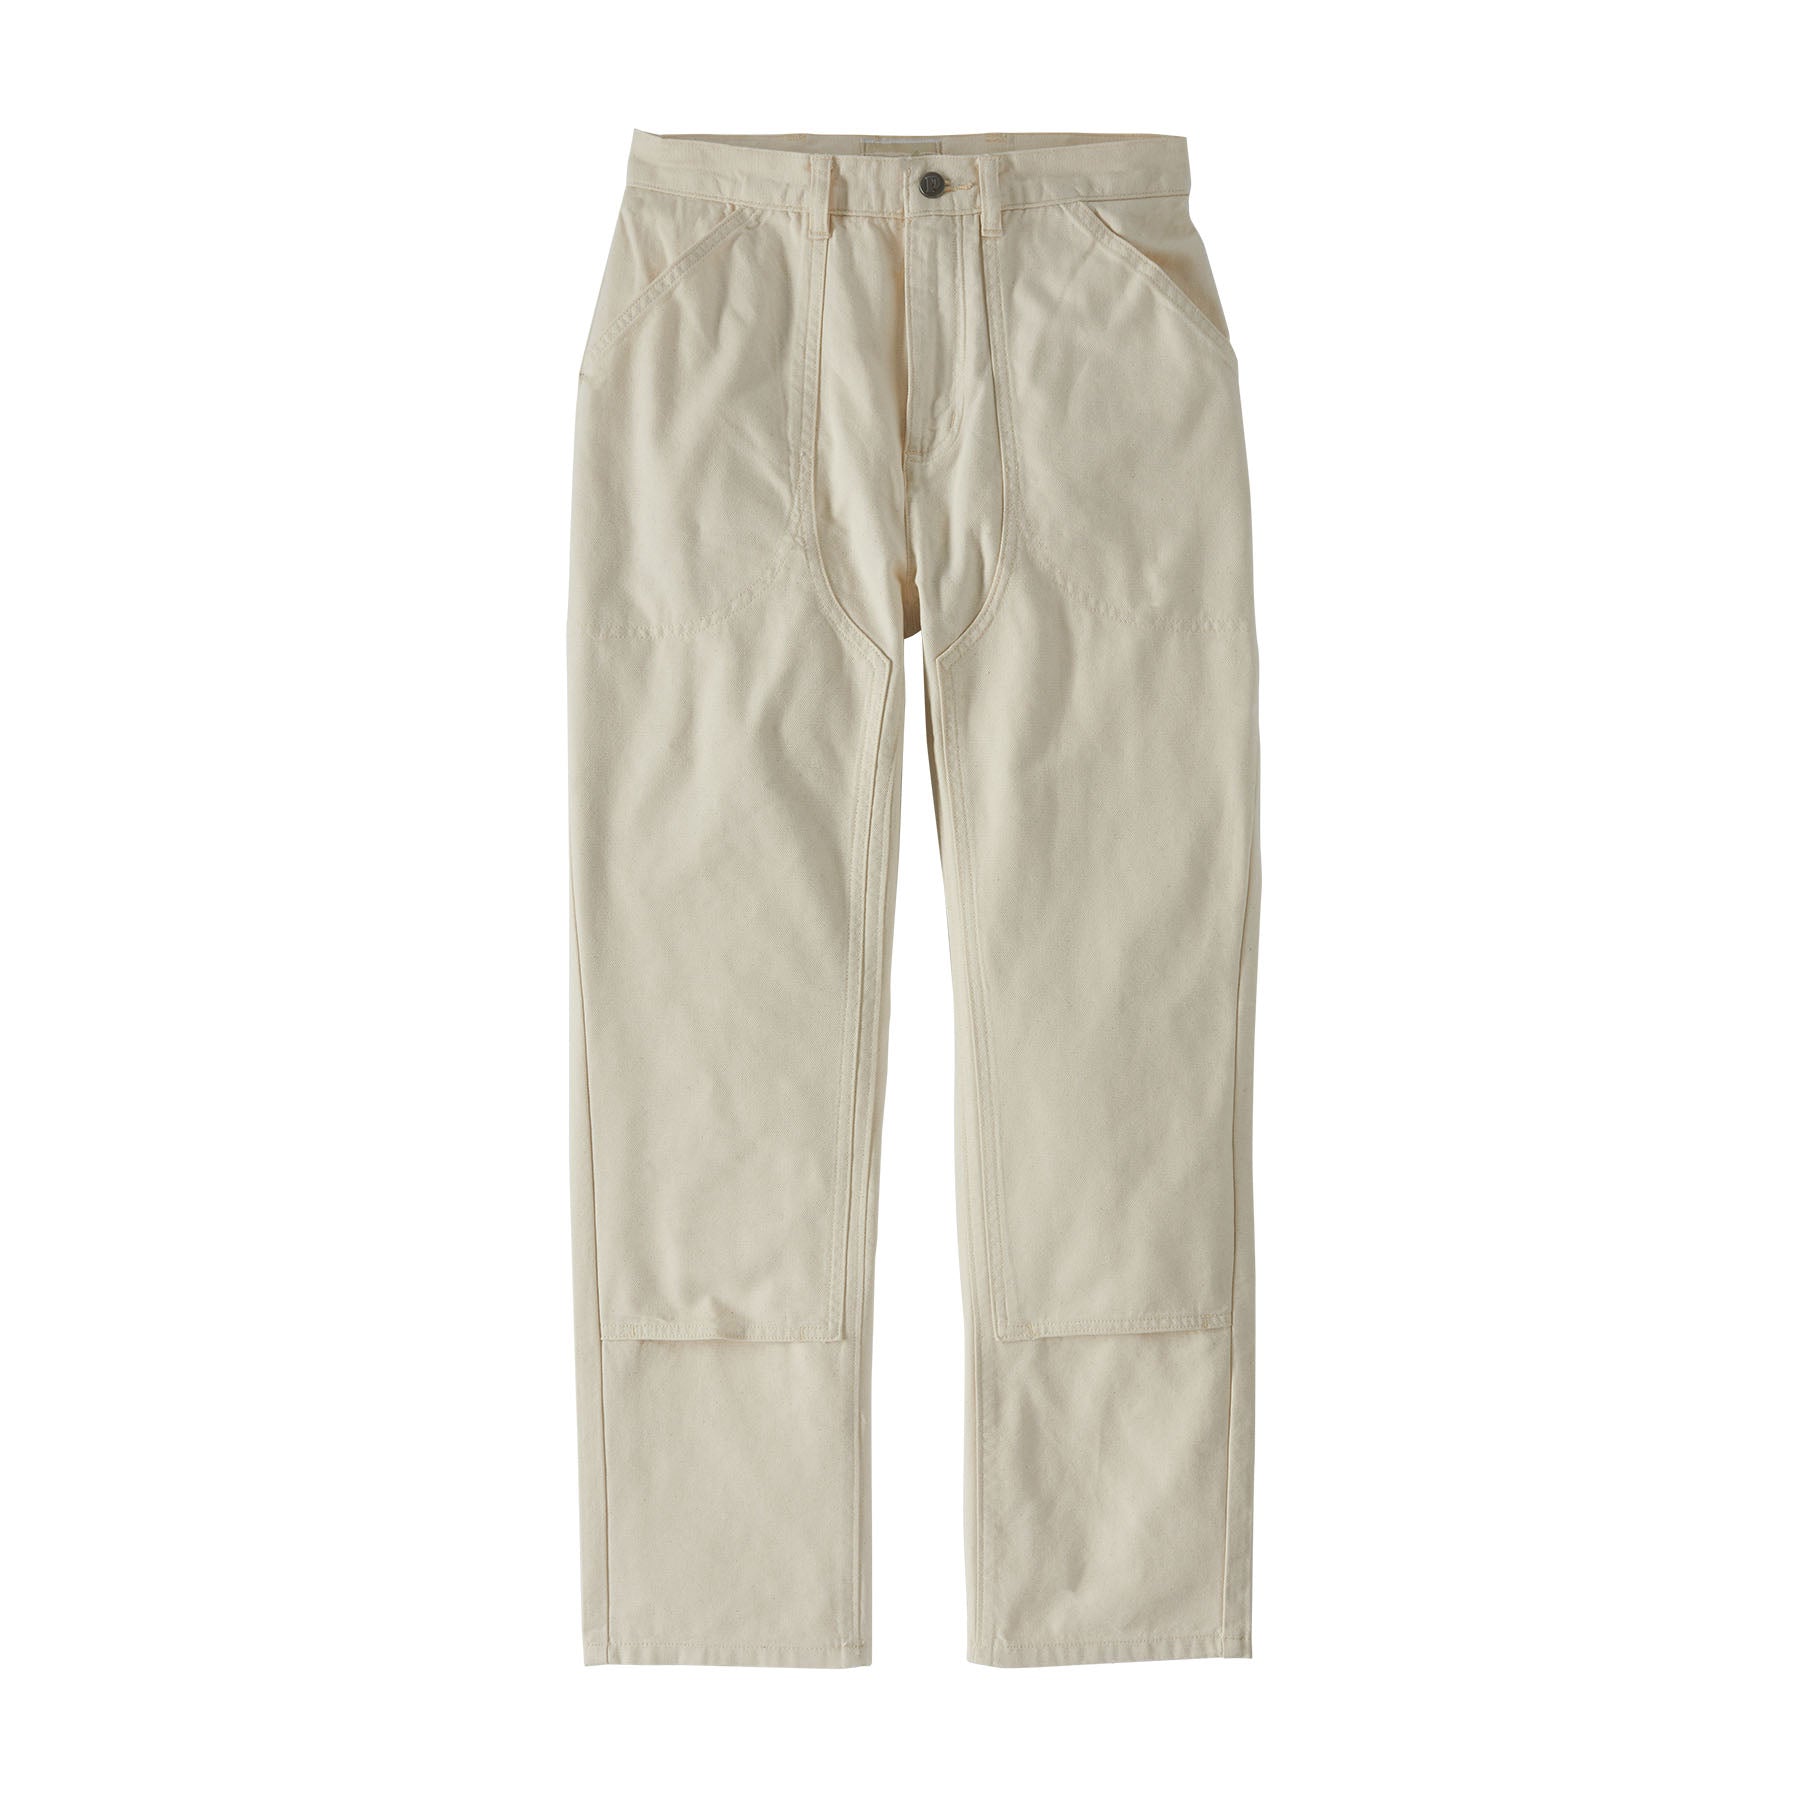 Women's Heritage Stand Up® Pants - Undyed Natural